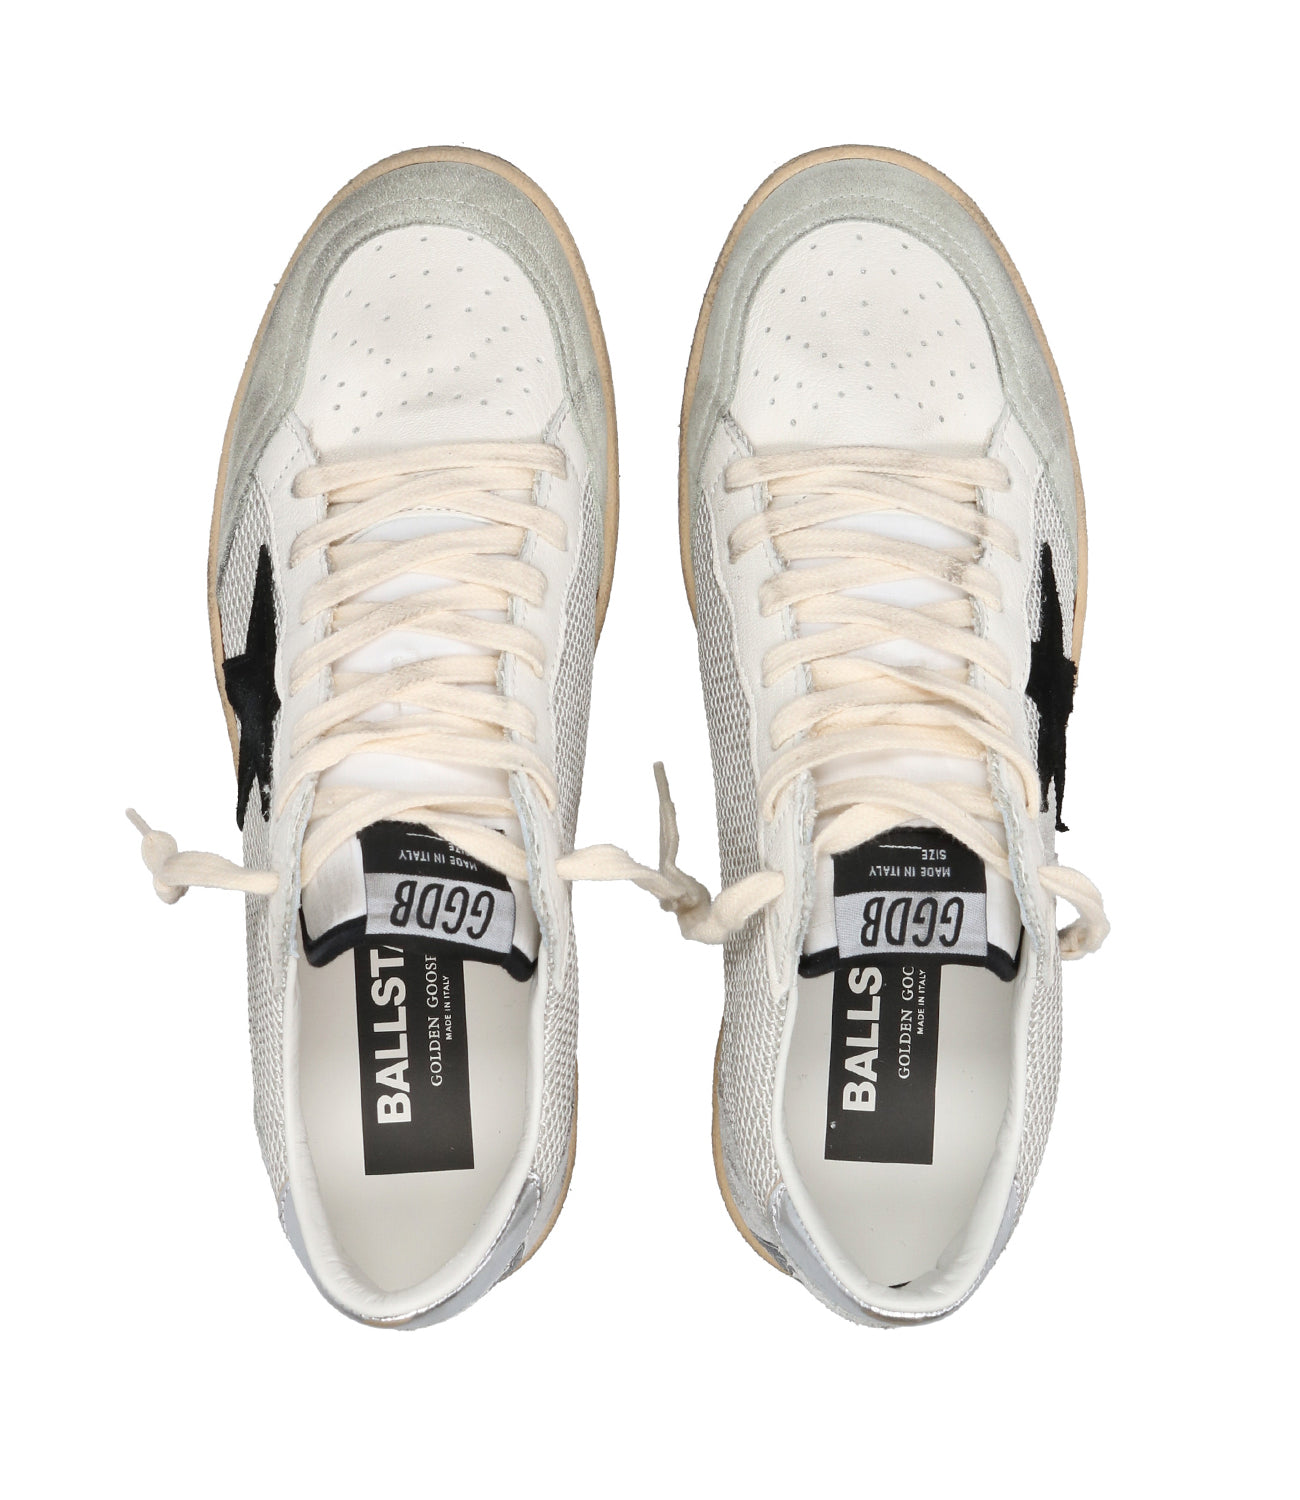 Golden Goose | Ball Star Sneakers Silver Black and White